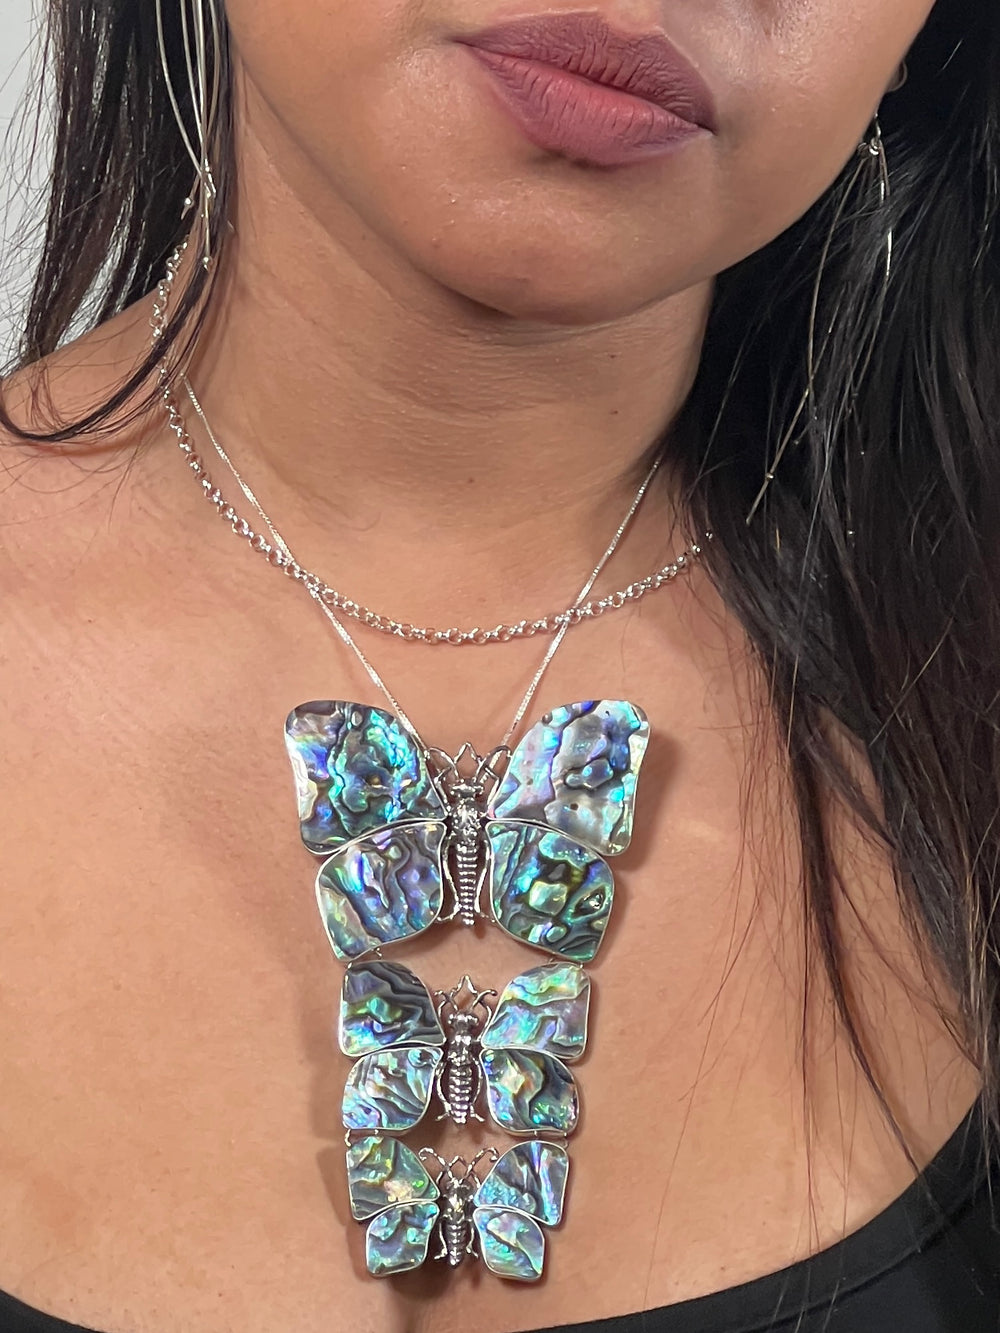 A nature lover adorned with a Super Silver statement pendant necklace/brooch with three butterflies.